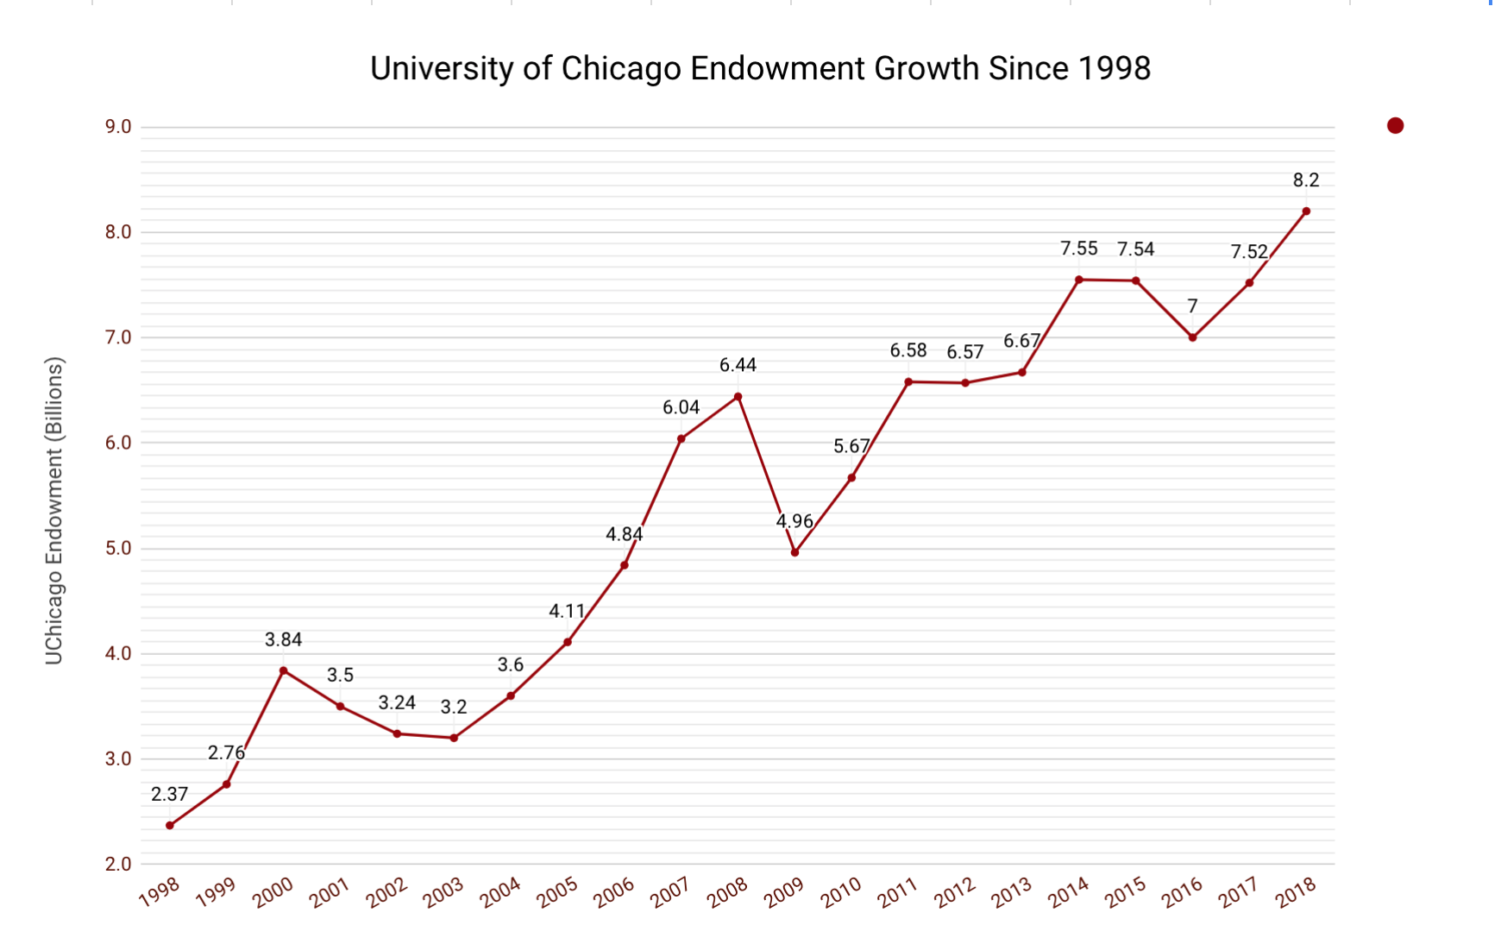 The value of the University of Chicago's endowment has more than tripled in the past two decades.